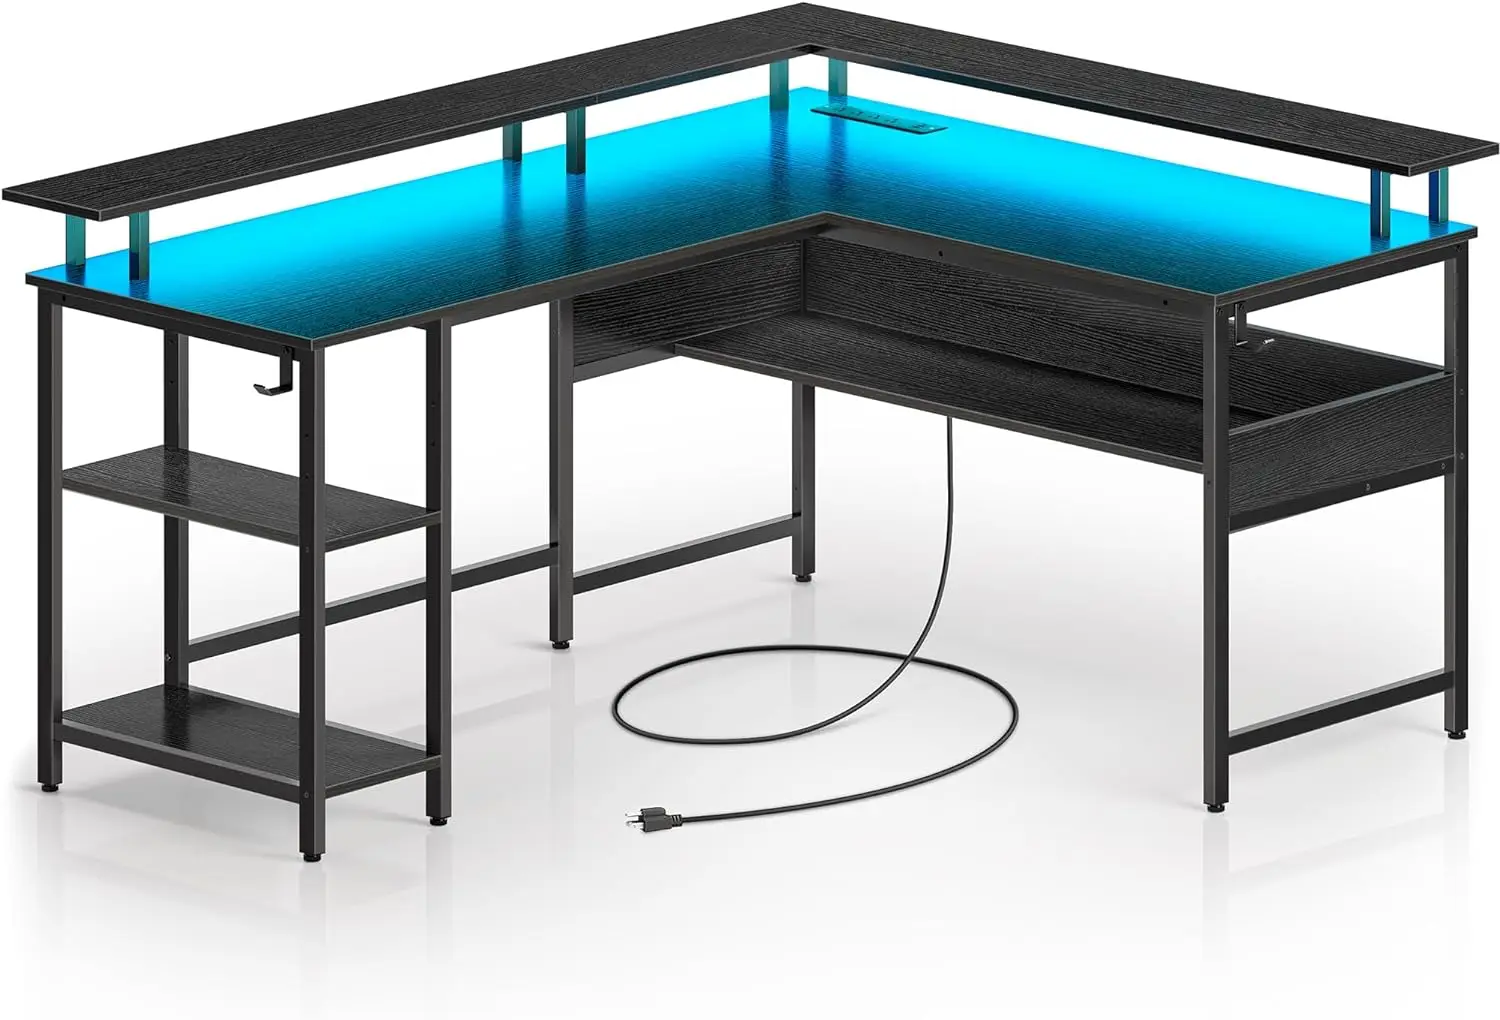 

Computer Desk L Shaped 59.4" with LED Lights and Power Outlets, Reversible L Shaped Gaming Desk with Monitor Stand